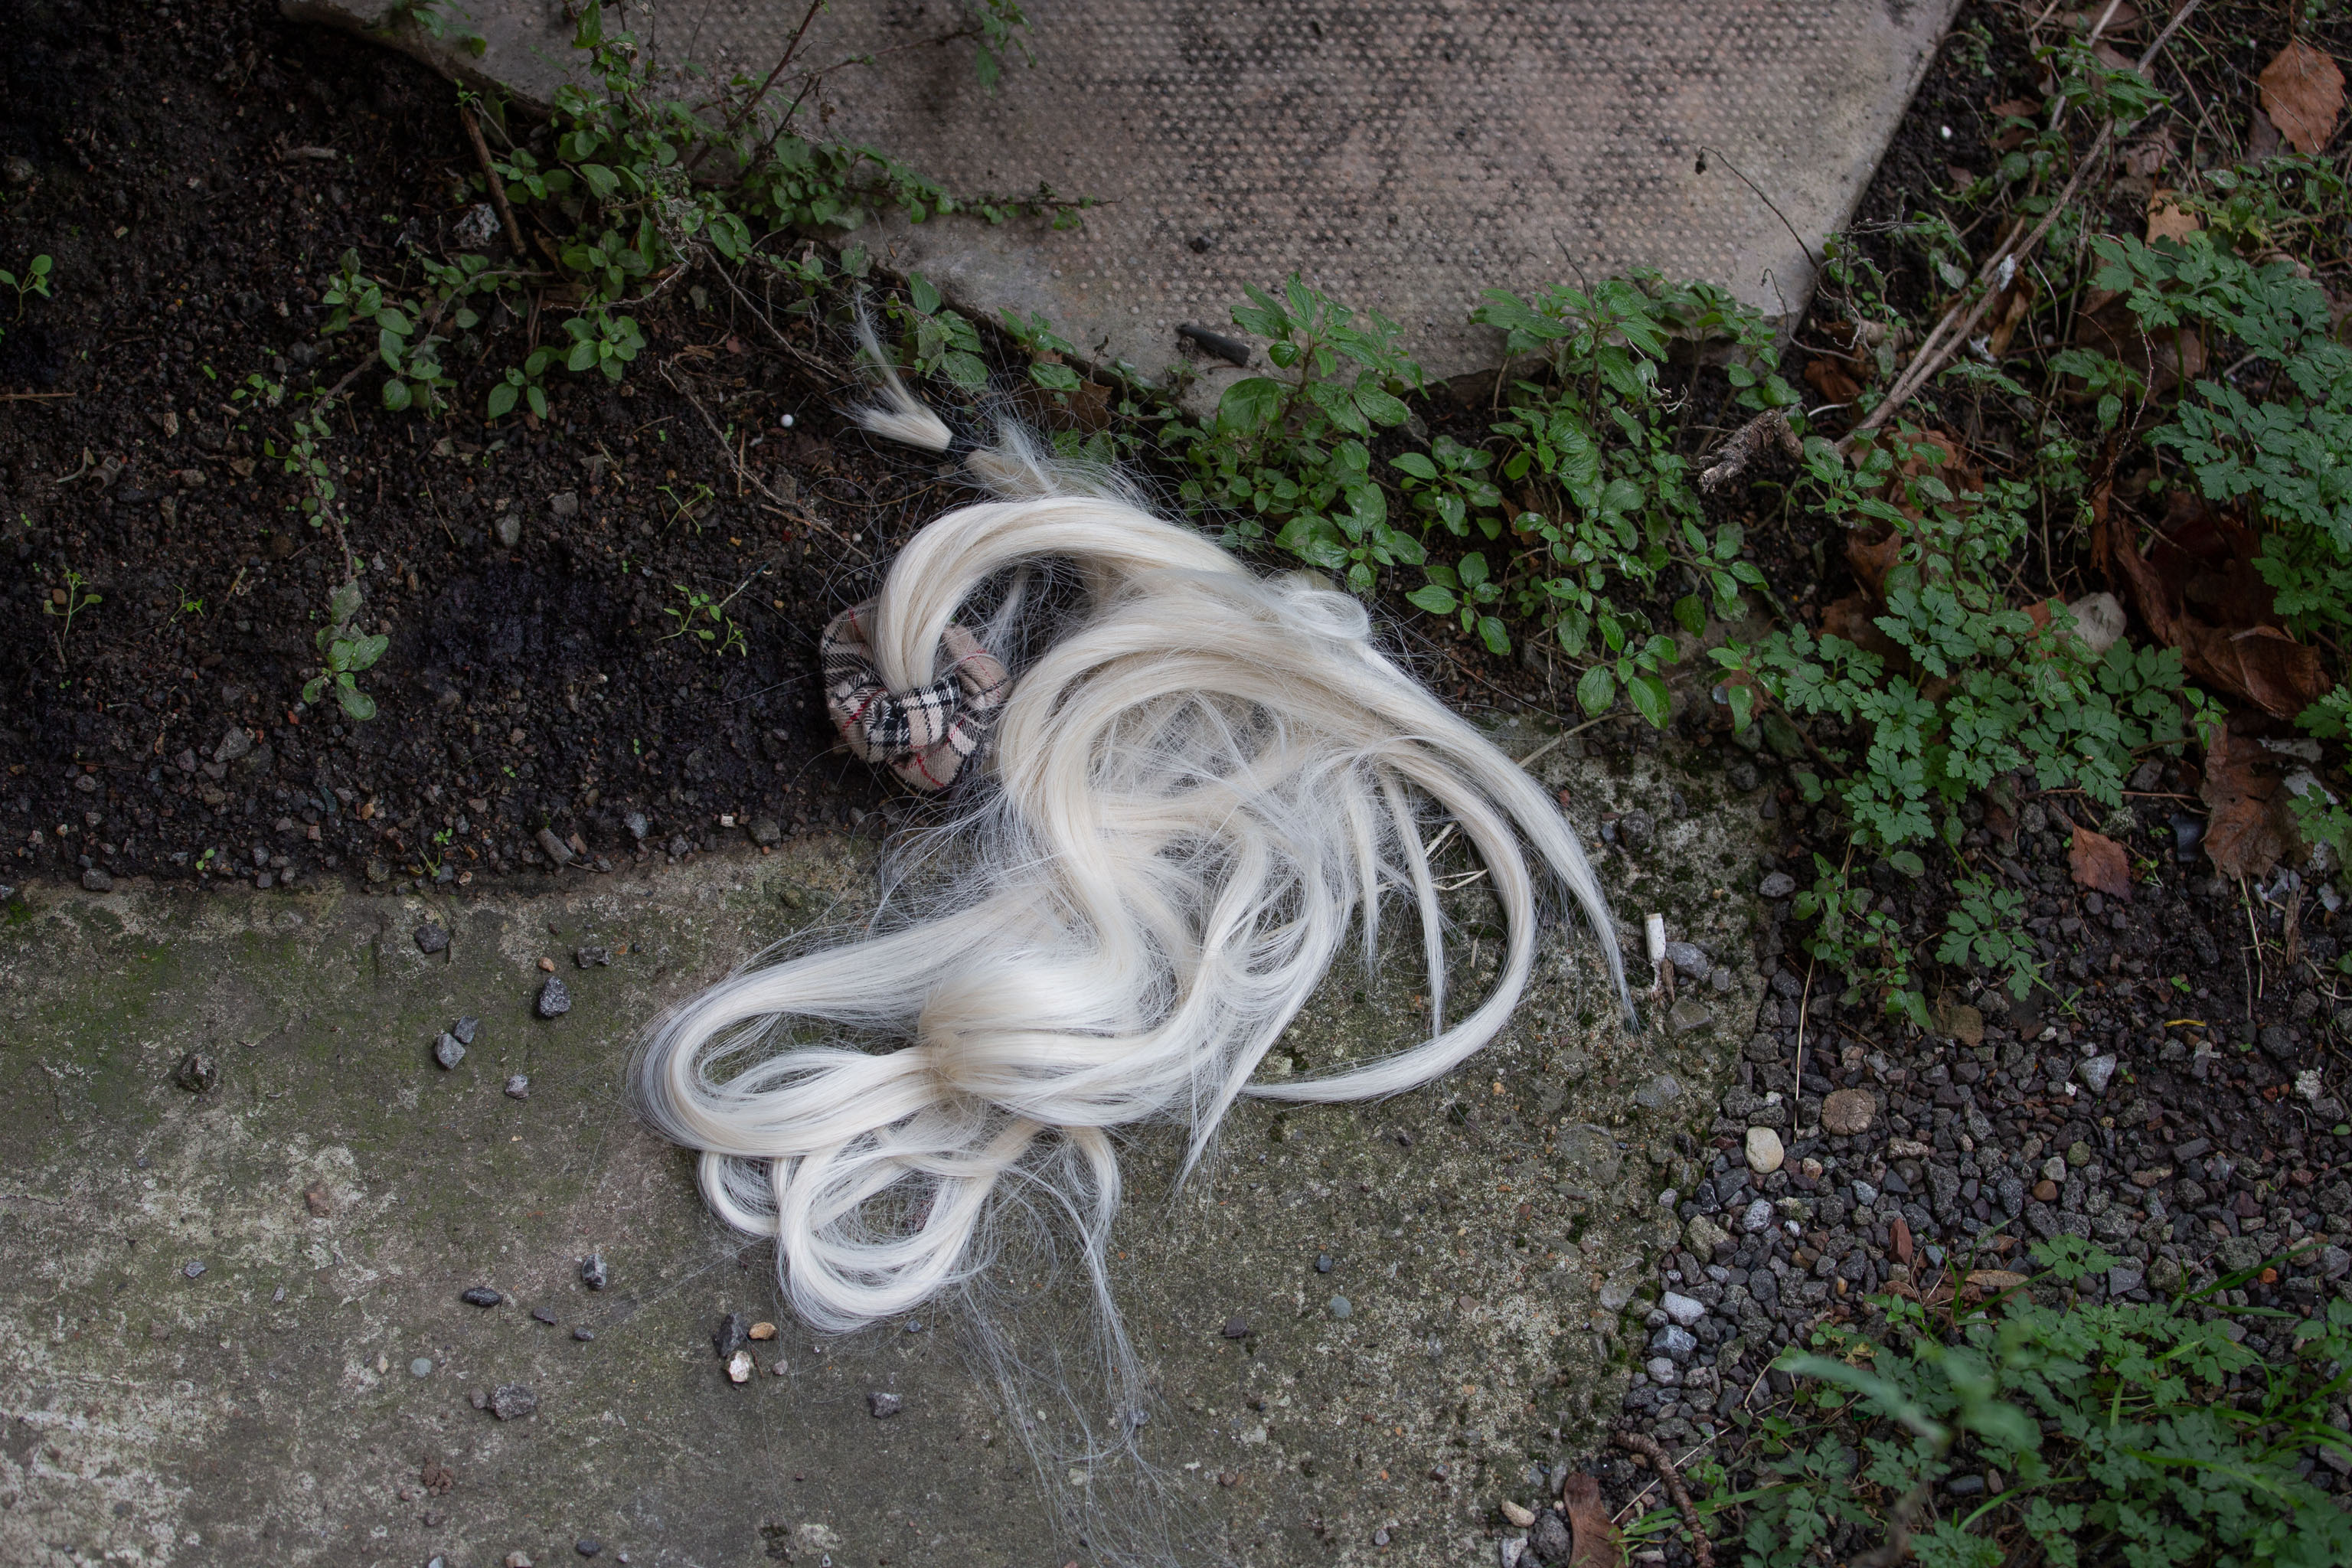 Lost
I think someone lost their hair extension. Or this is the resting place of a My Little Pony that's been buried arse-up.
